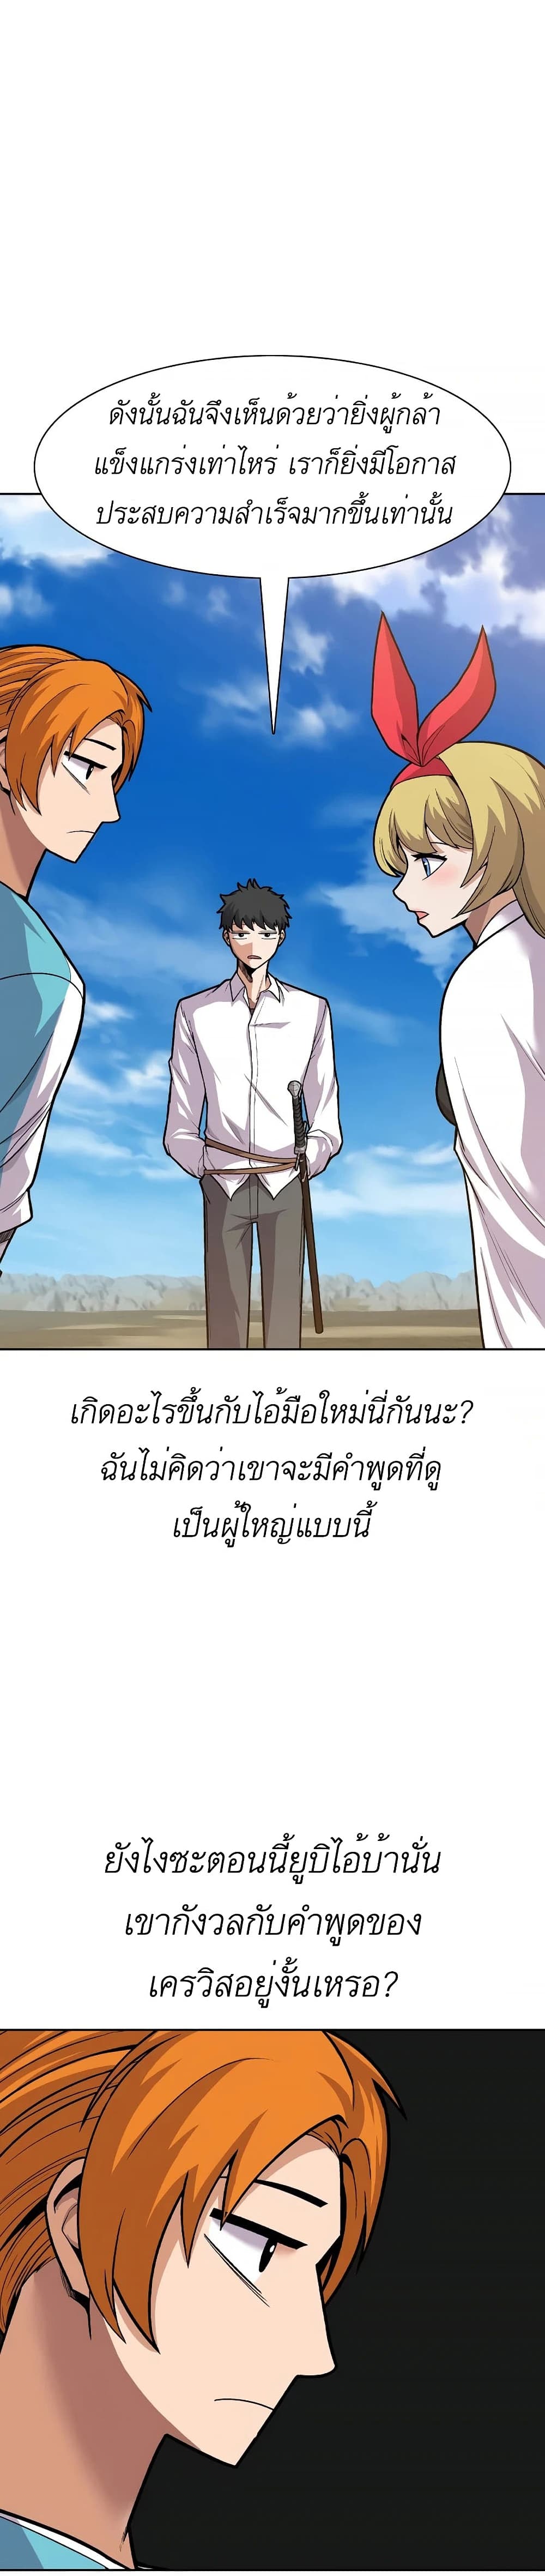 Raising Newbie Heroes In Another World ตอนที่ 11 (6)